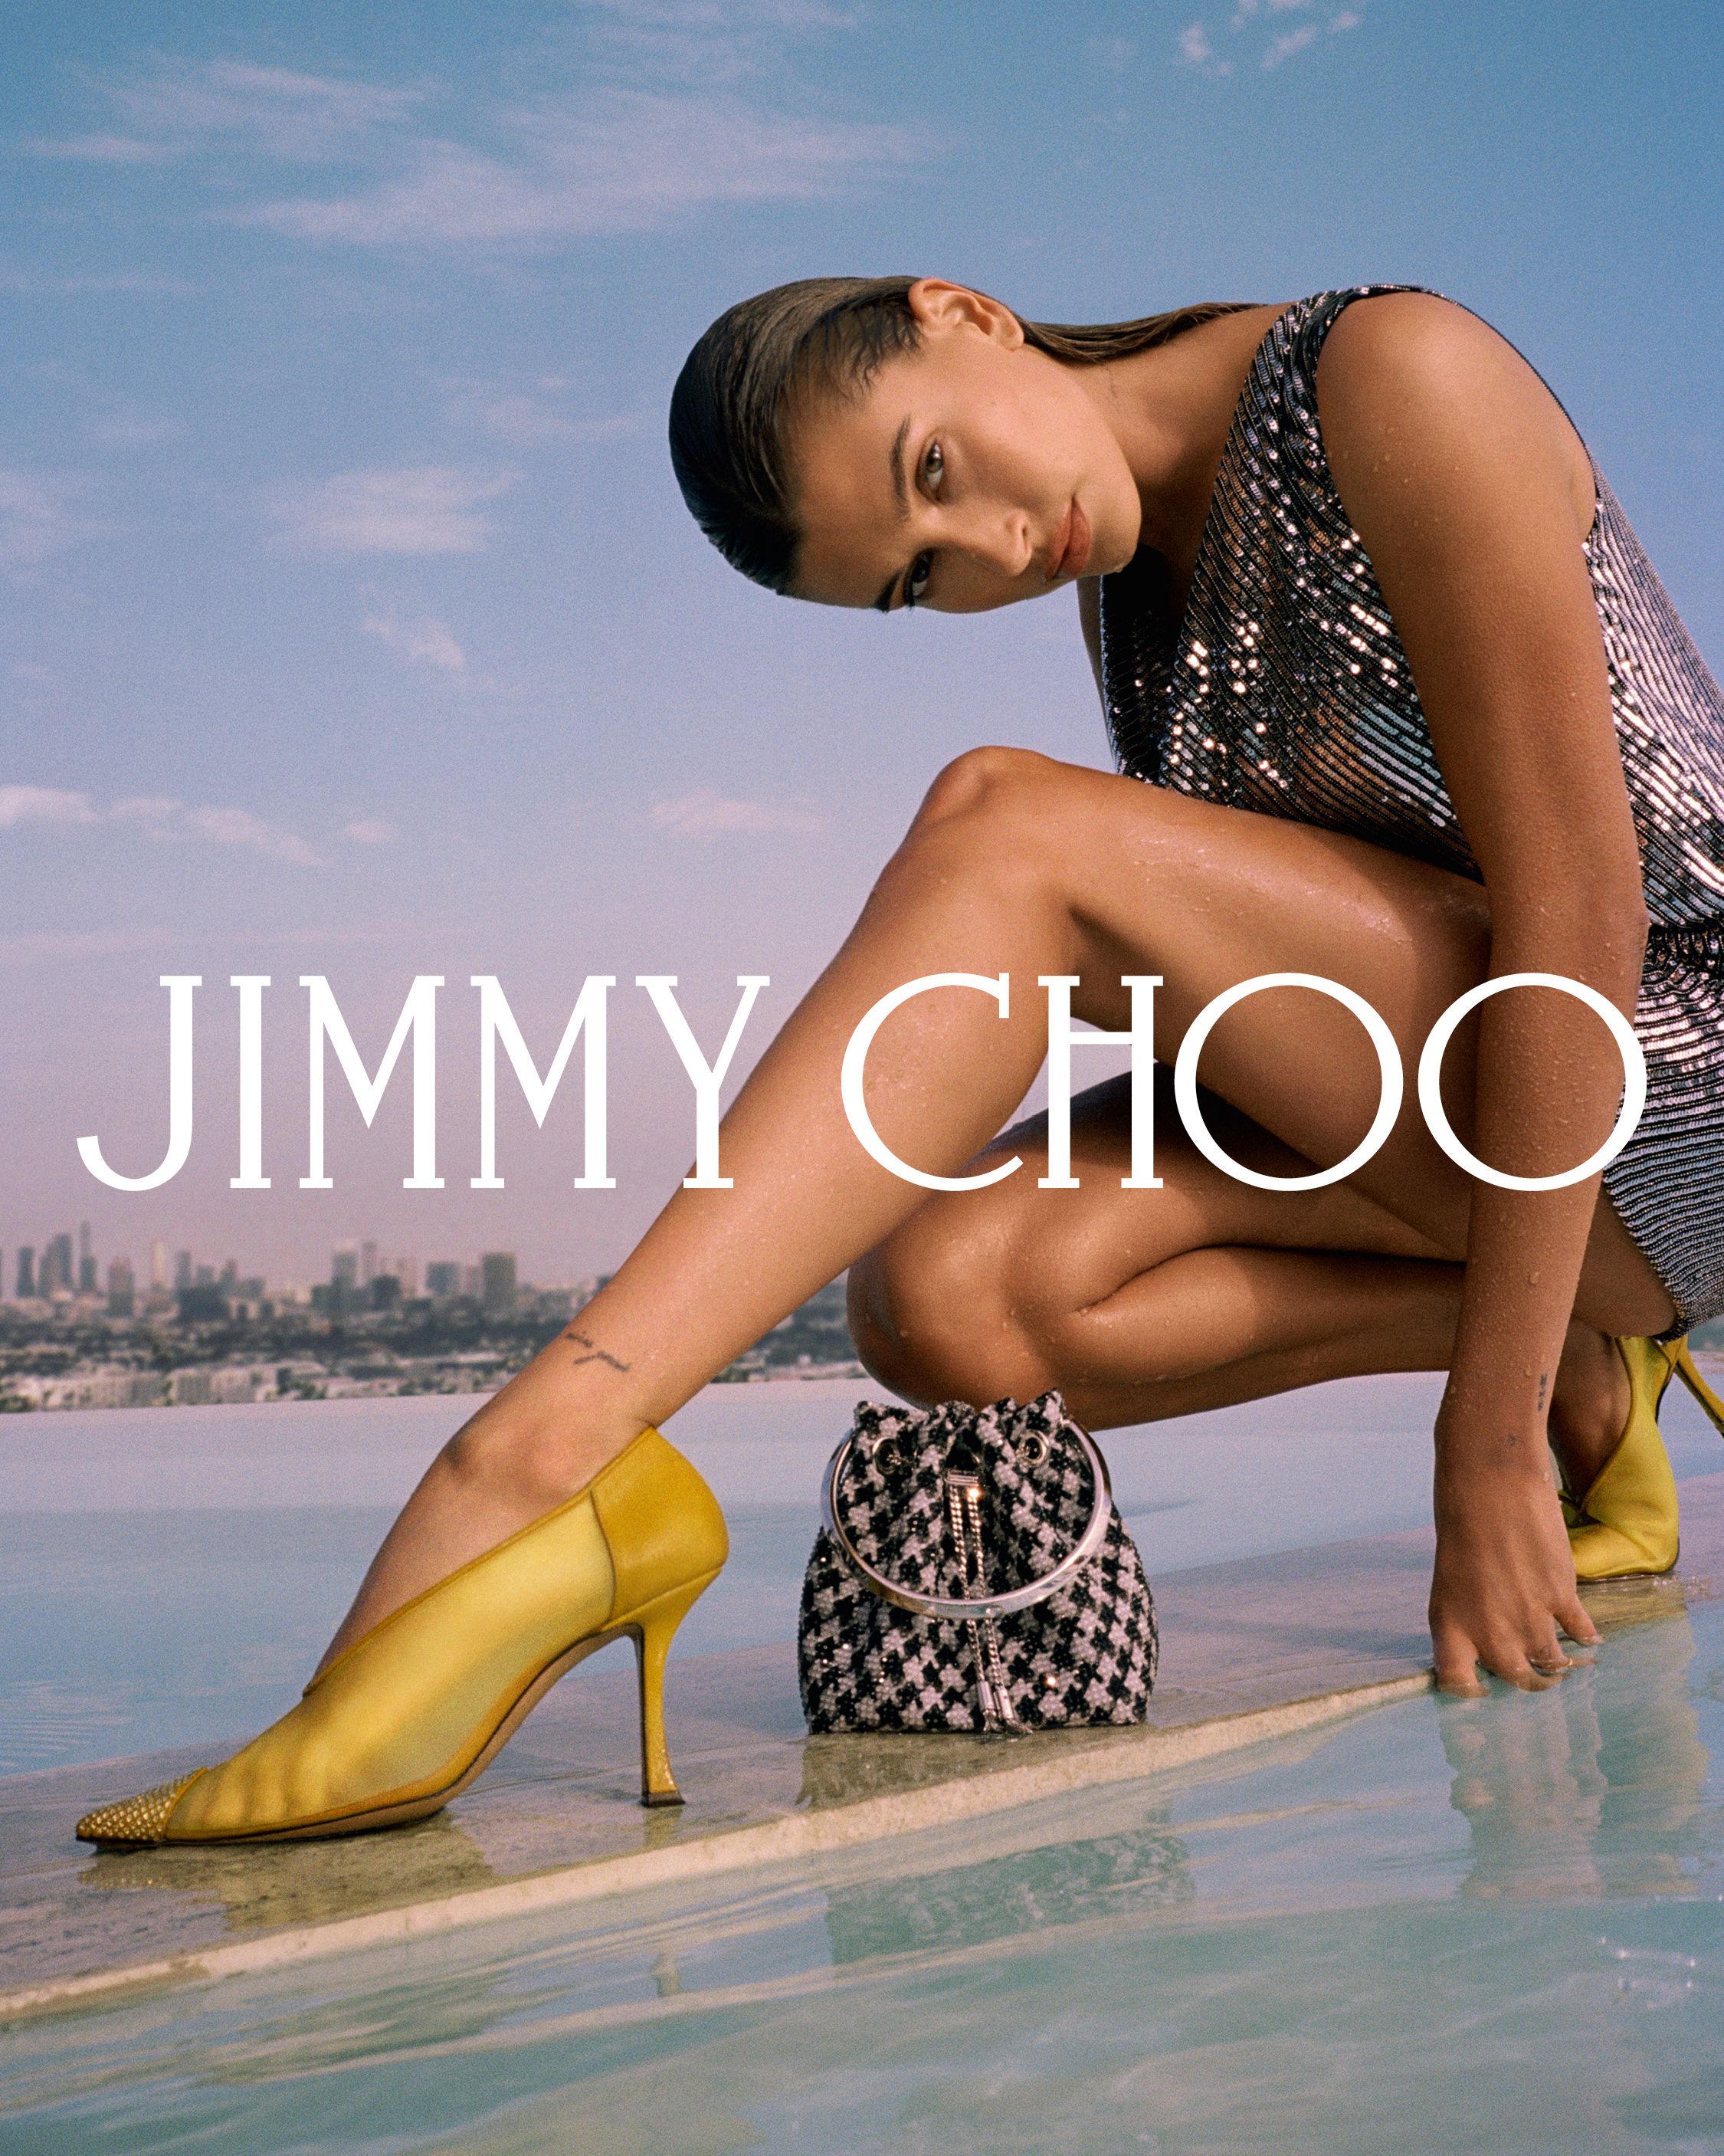 Jimmy Choo co-founder is going in new direction with latest shoe line